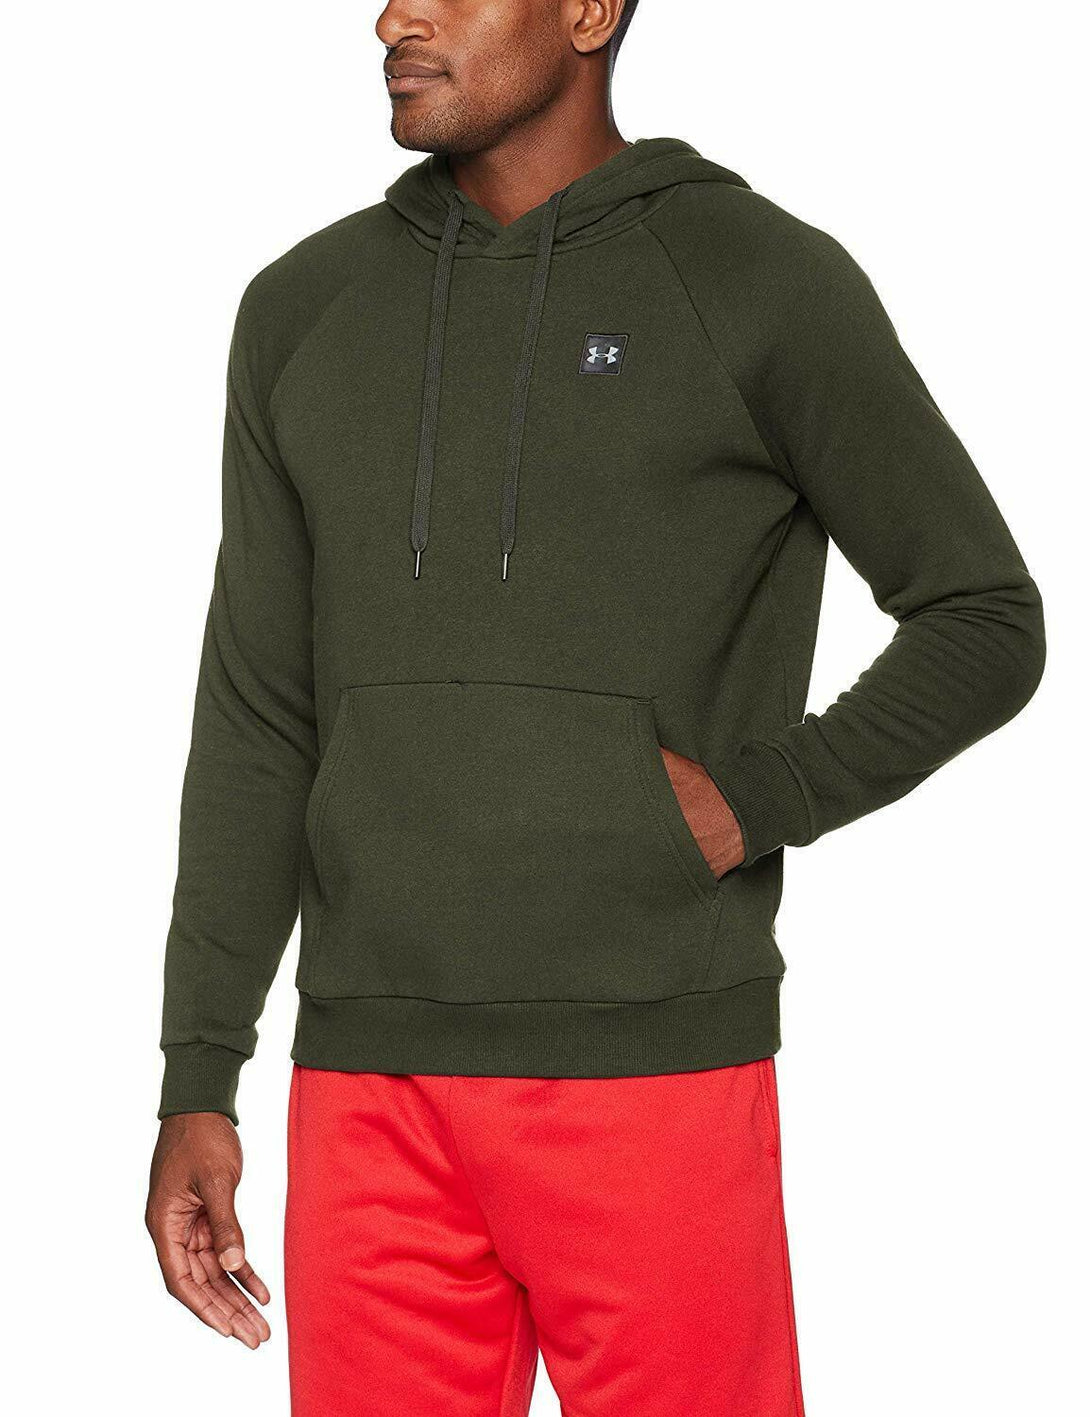 Rugby Heaven Under Armour Rival Fleece Pull Over Hoody - www.rugby-heaven.co.uk